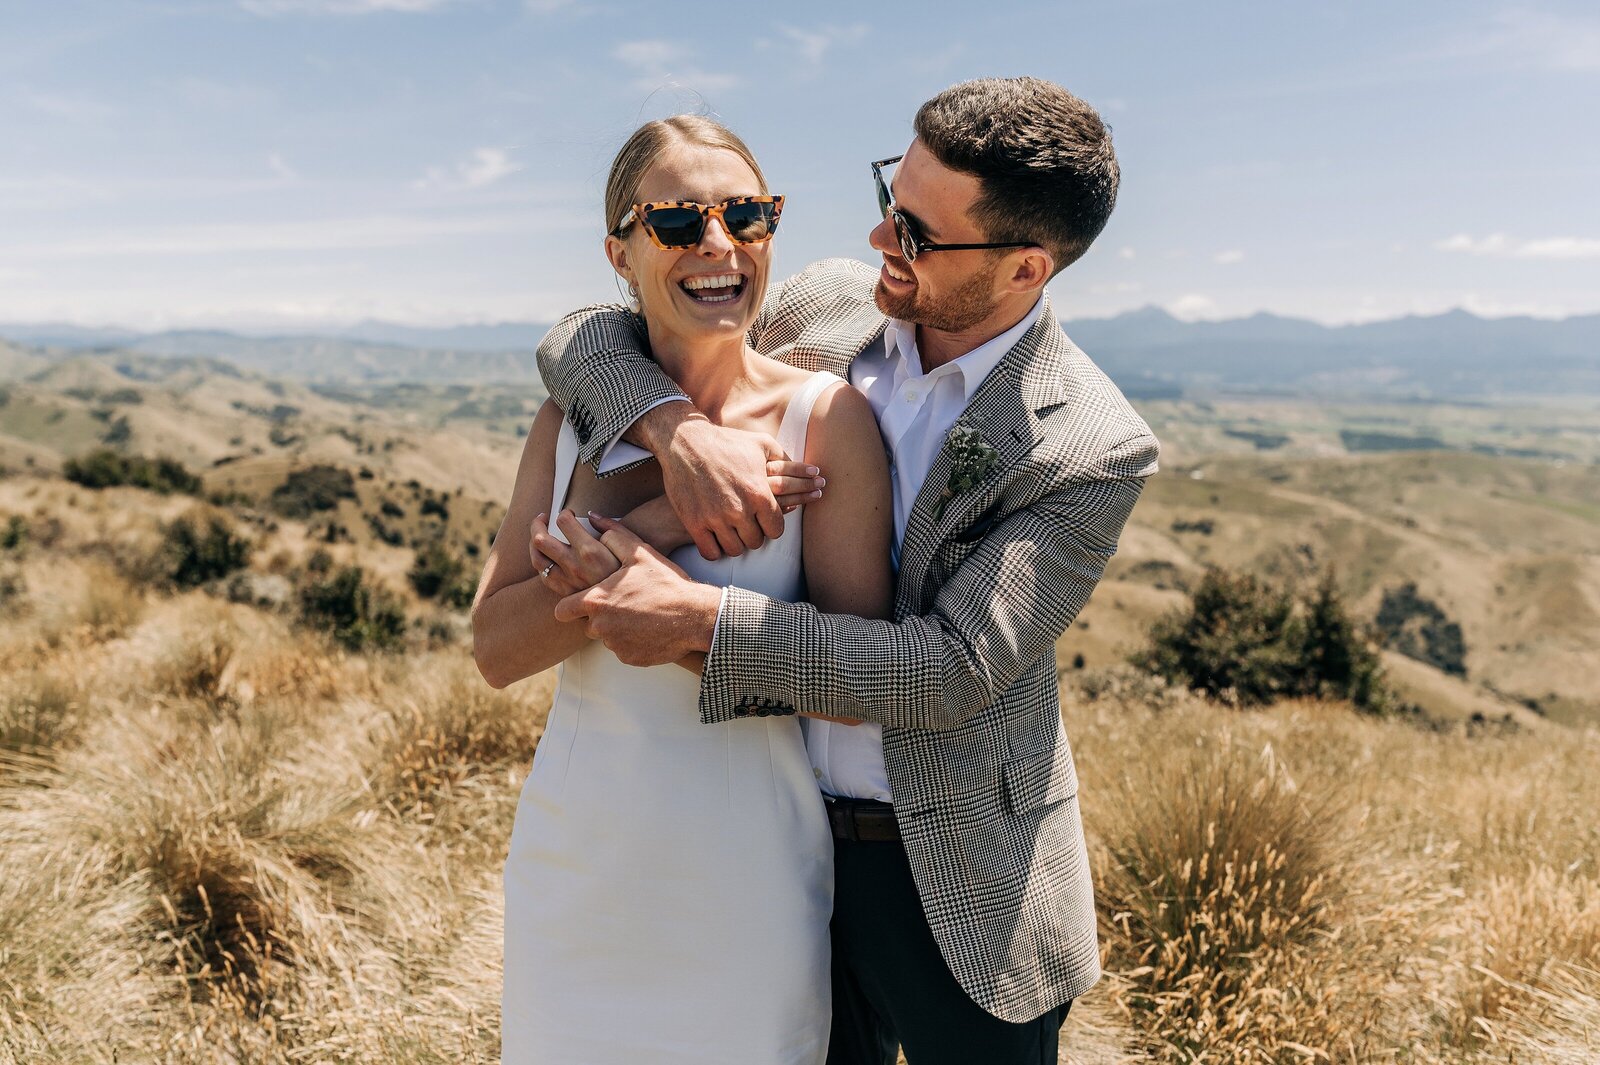 bride and groom on top of wither hills blenheim photo spot wedding day wearing sunglasses tweed blazer white dress emilia wickstead